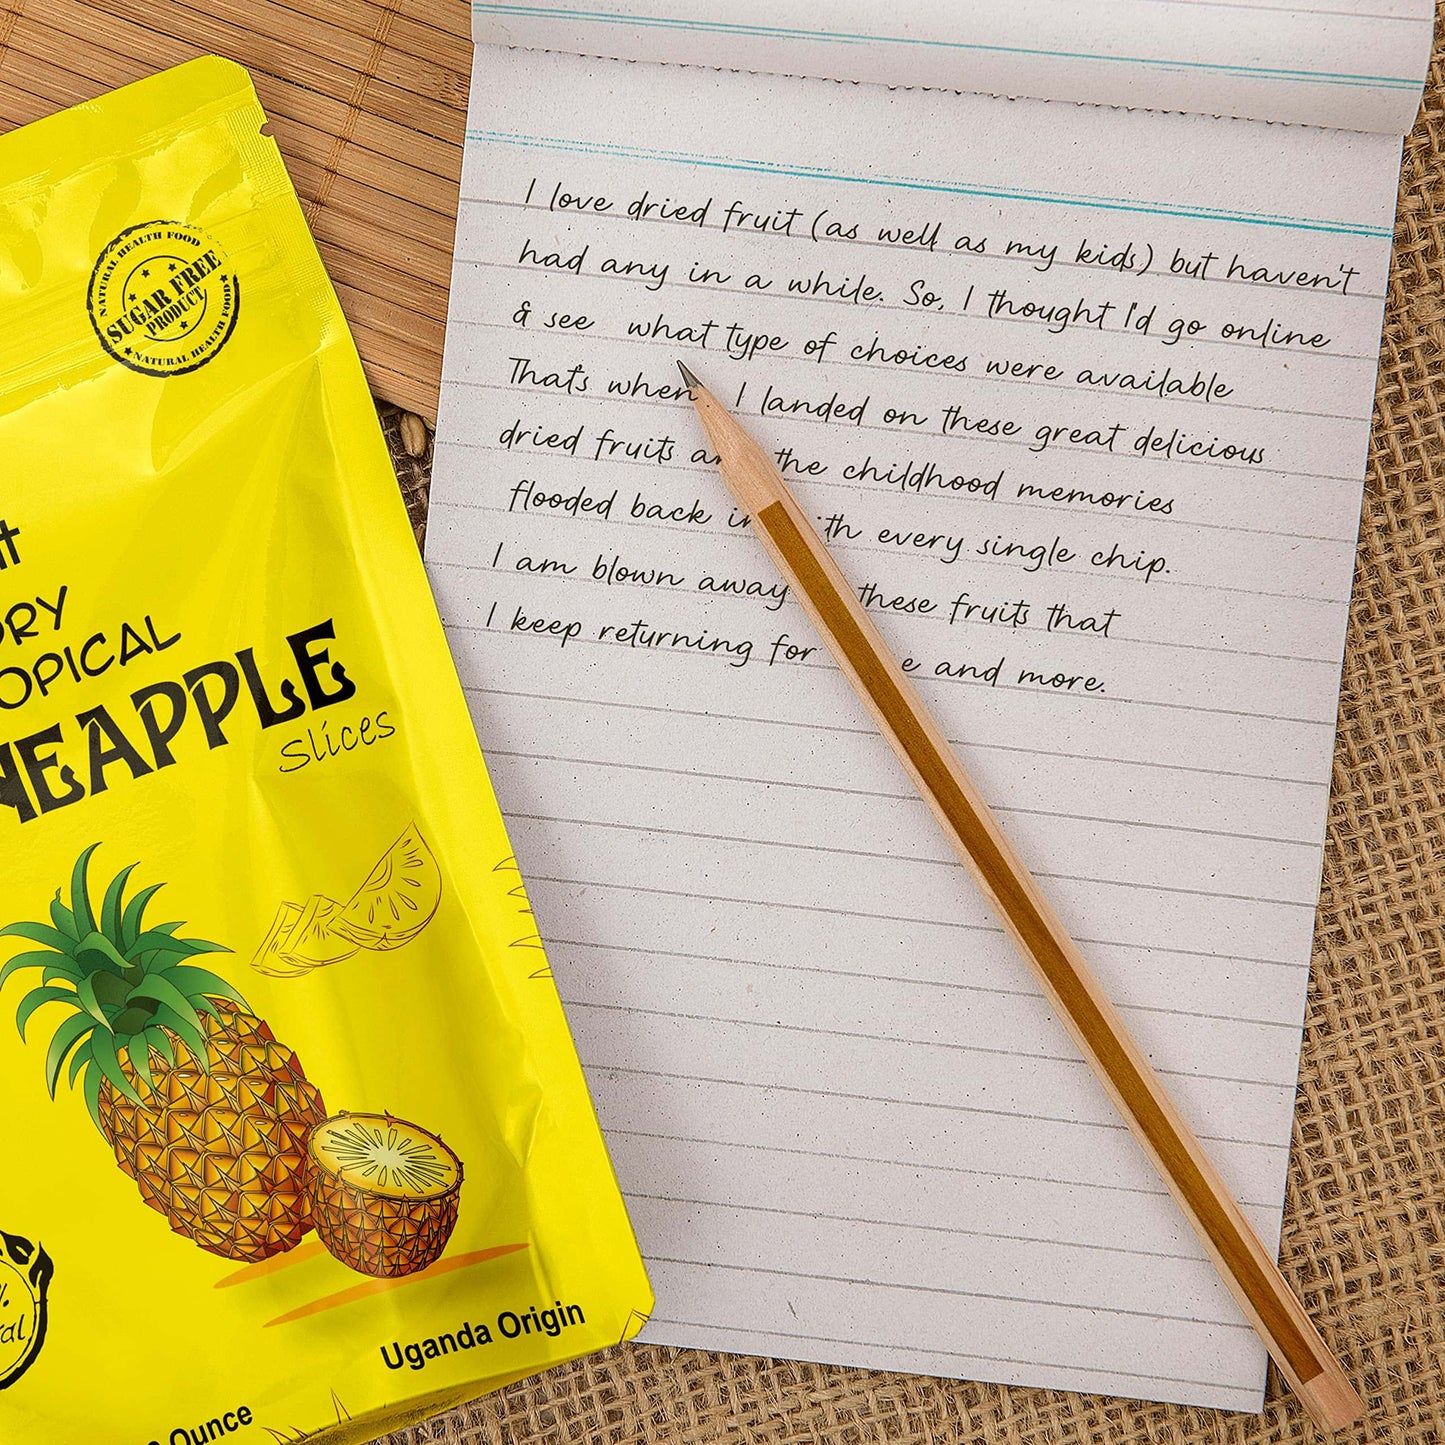 
                  
                    Dry Pineapple Slices | Organic Dried Pineapple Slices with No Sugar Added | Gluten Free | NON-GMO 3.6 oz (3 count )
                  
                